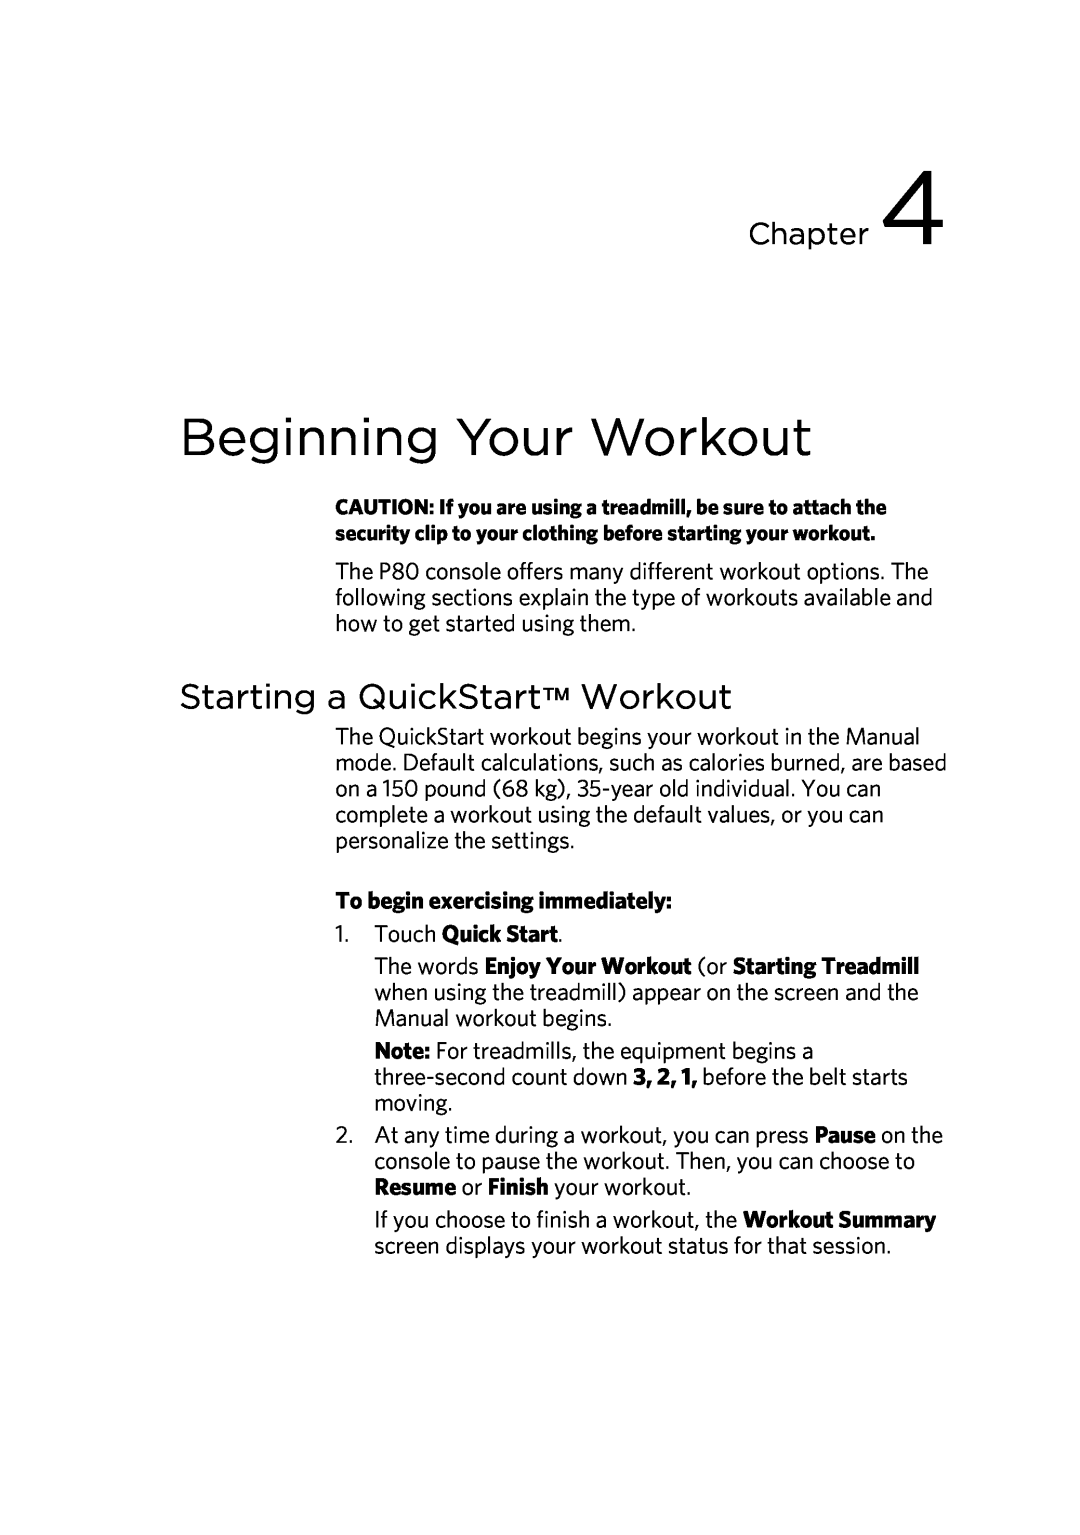 Precor P80 manual Beginning Your Workout, Starting a QuickStart Workout, To begin exercising immediately, Touch Quick Start 